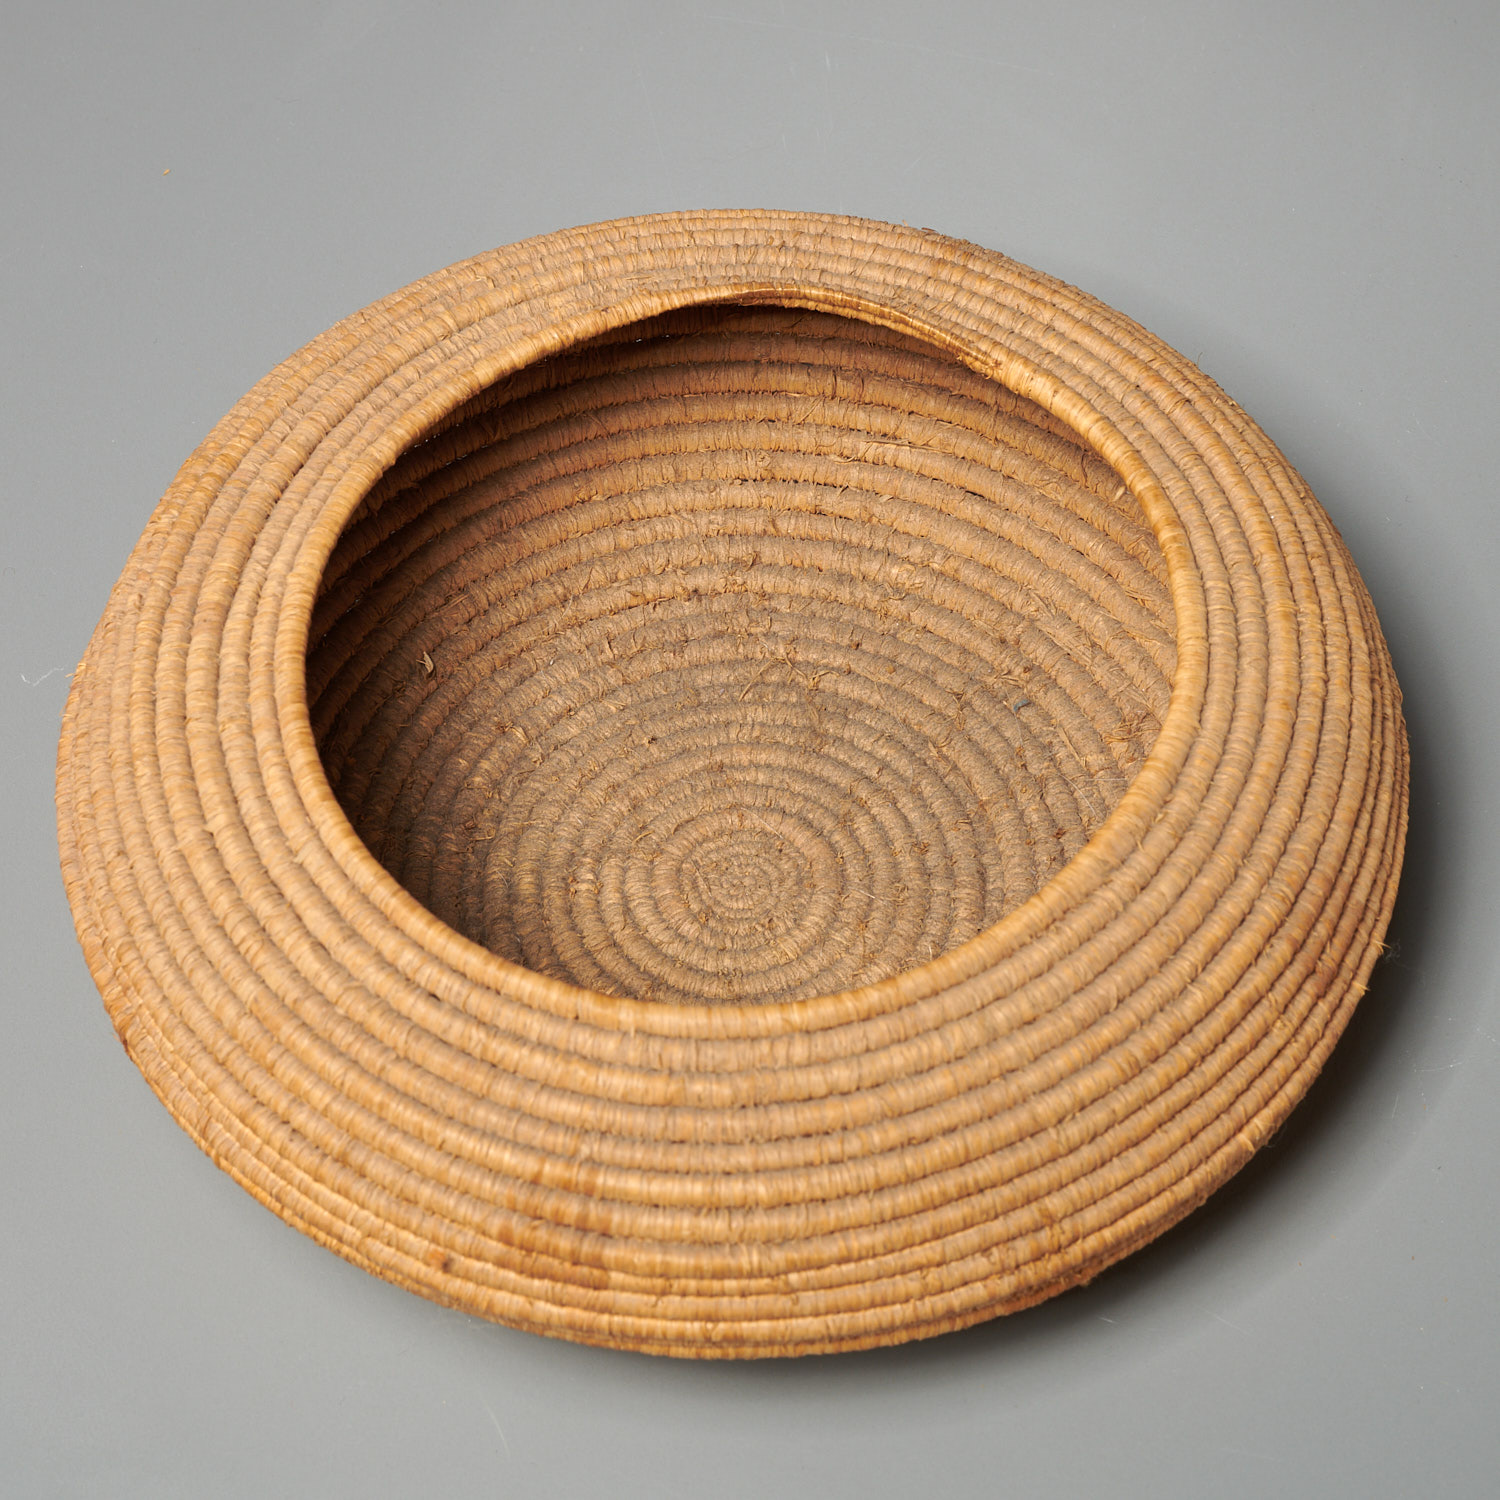 (2) Native American woven baskets - Image 7 of 8